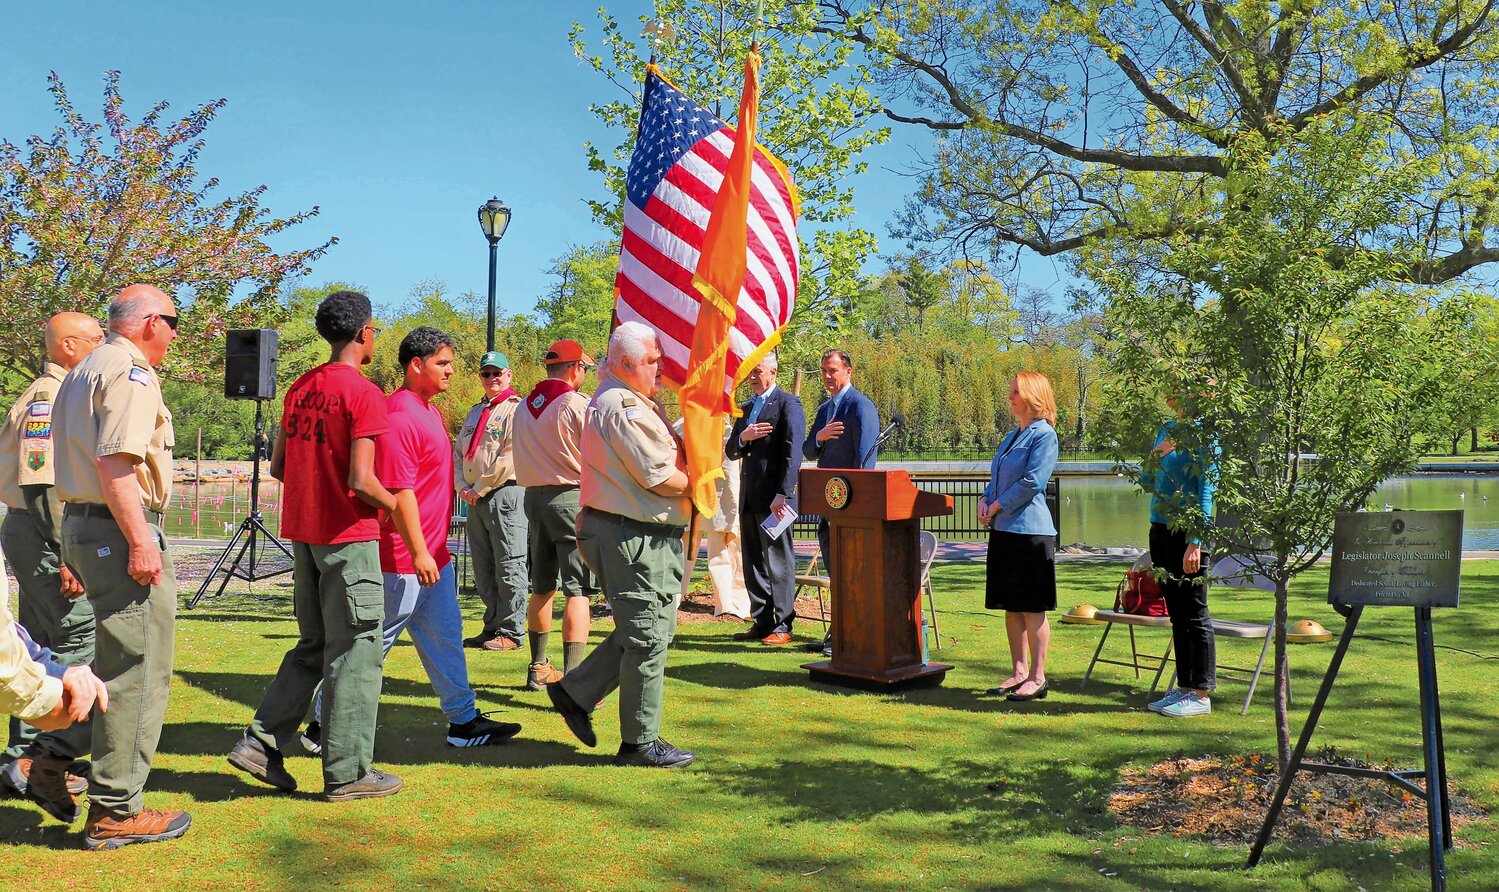 The Boy Scout Troop 824 and 182 led the pledge of allegiance at the ceremony, which was symbolic, as Joseph Scannell was a scout member.